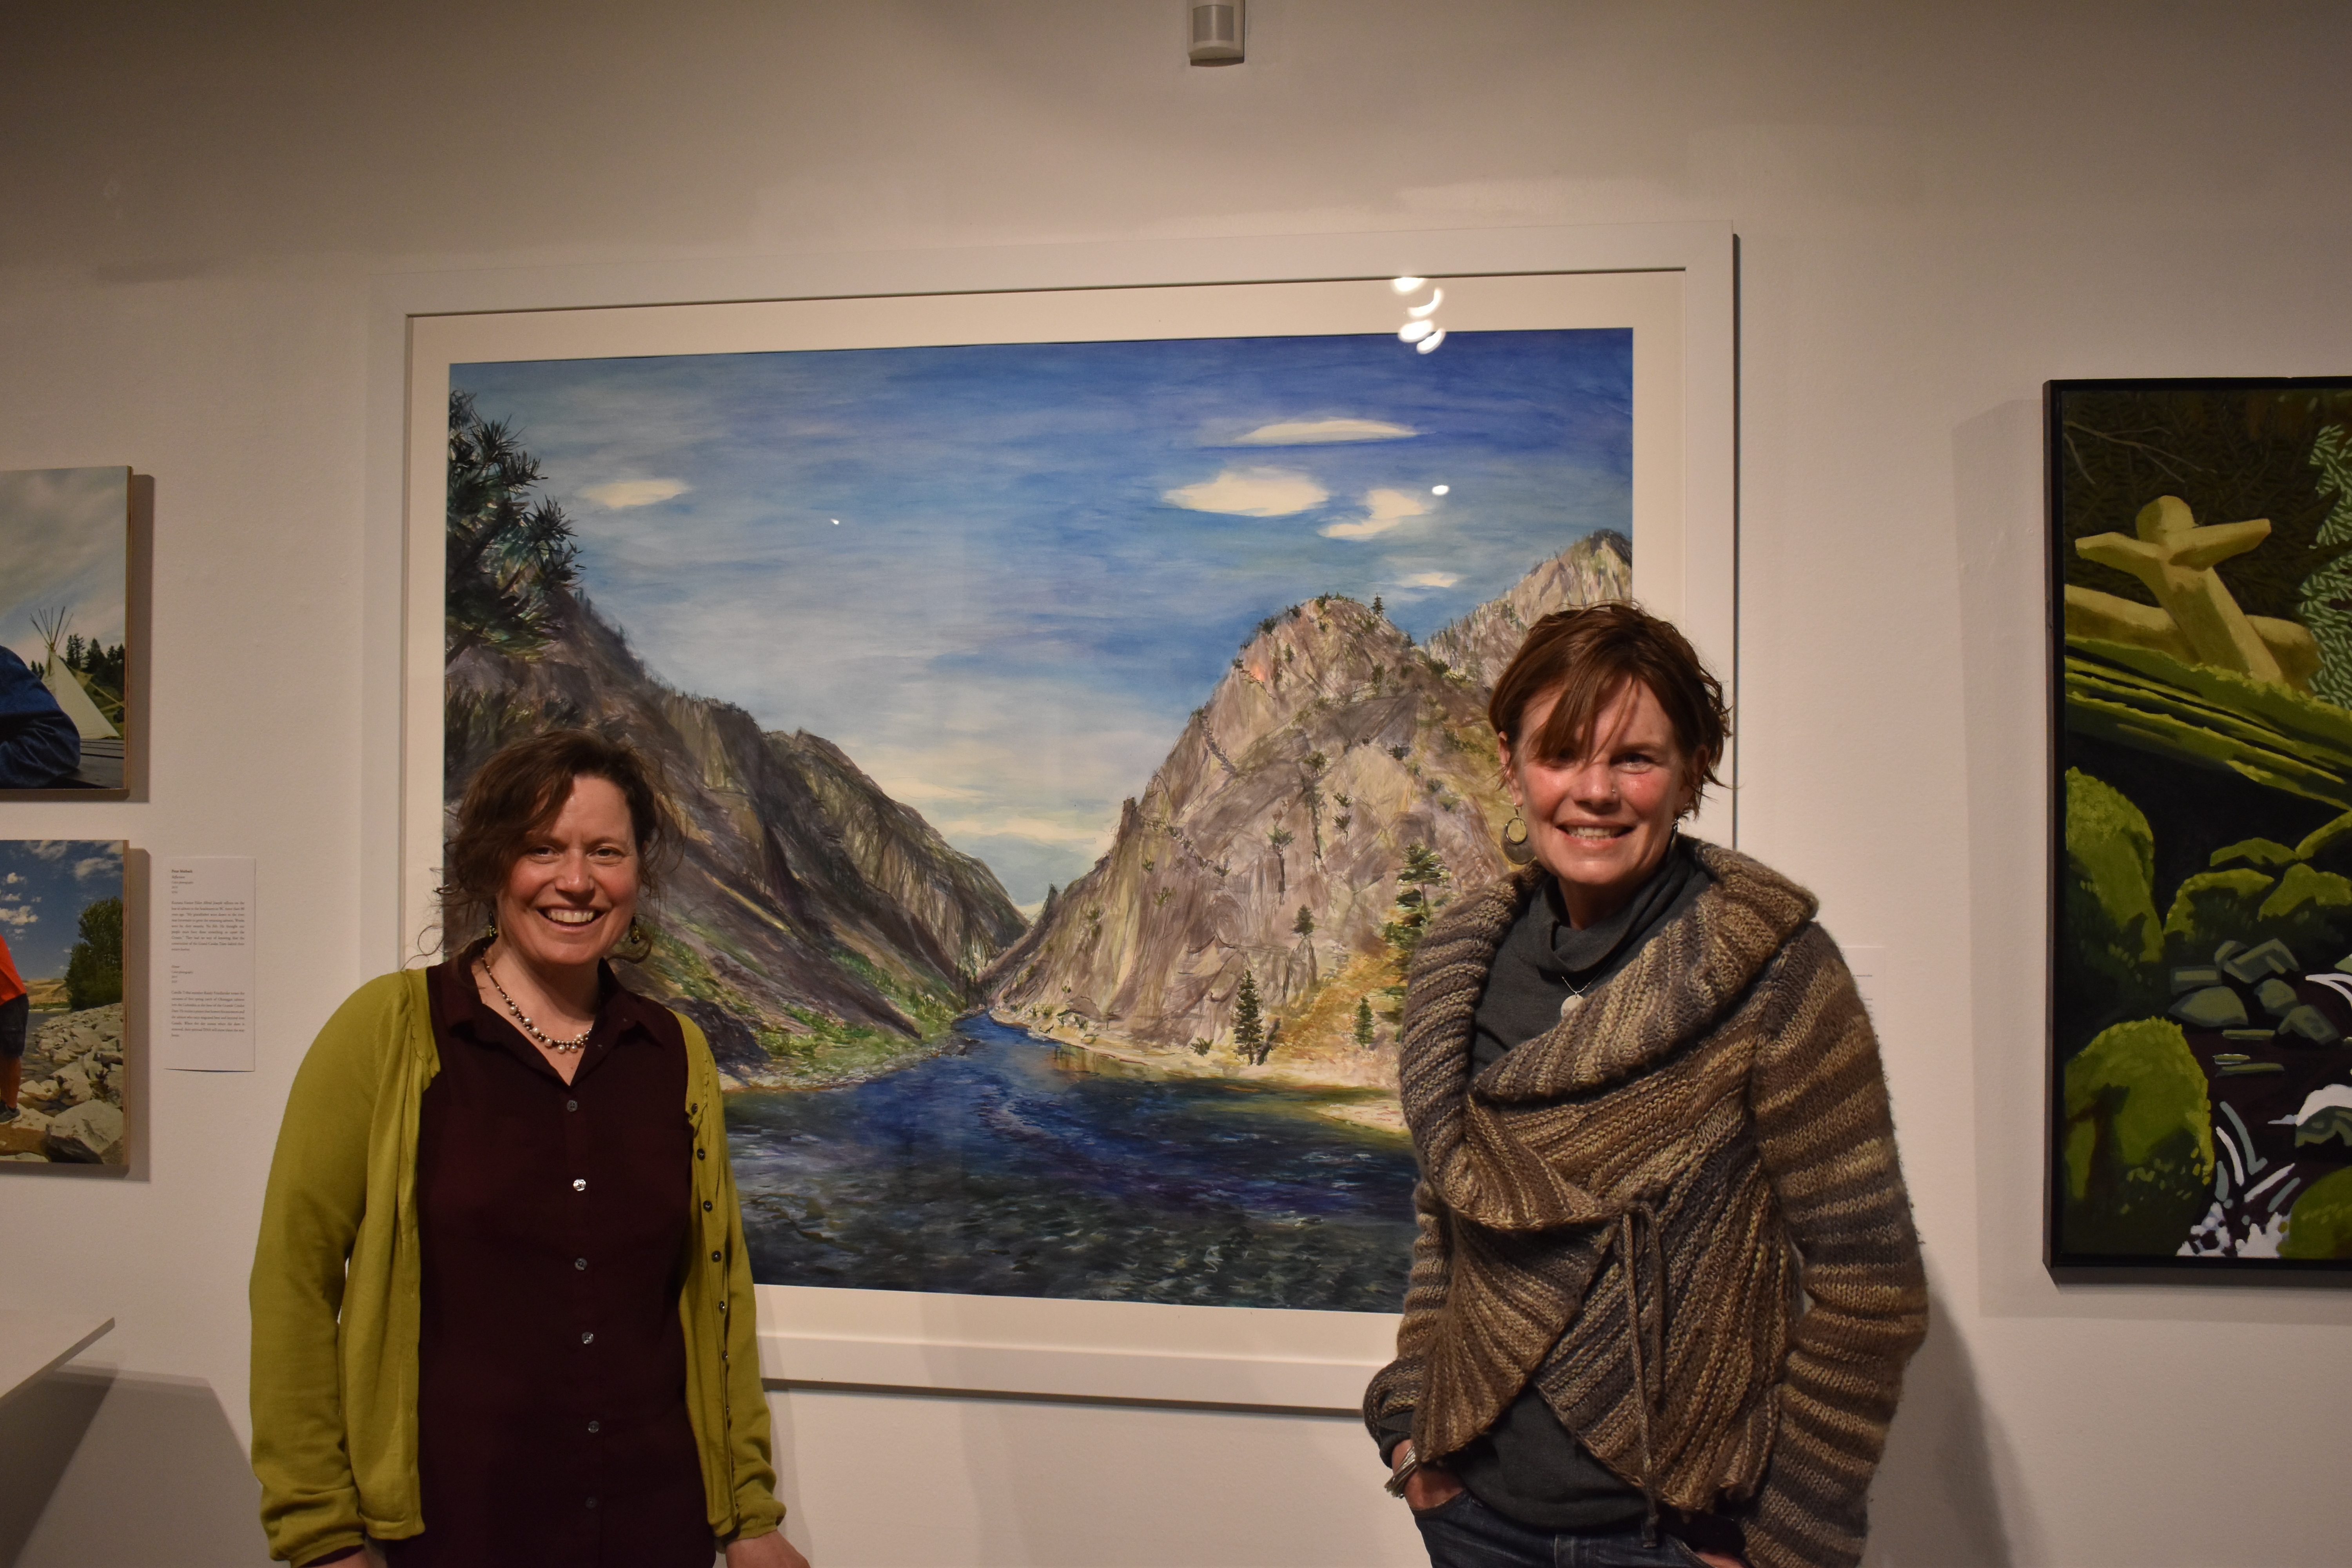 Elise Richman, associate professor of art, left, and Britt Freda, of the Northwest Artists Against Extinction, at the group's exhibition Honor: People and Salmon at the Kittredge Gallery on the University of Puget Sound campus. The two stand in front of Richman's piece, Confluence, which was included in the exhibition. Photo by Lauren Gallup.